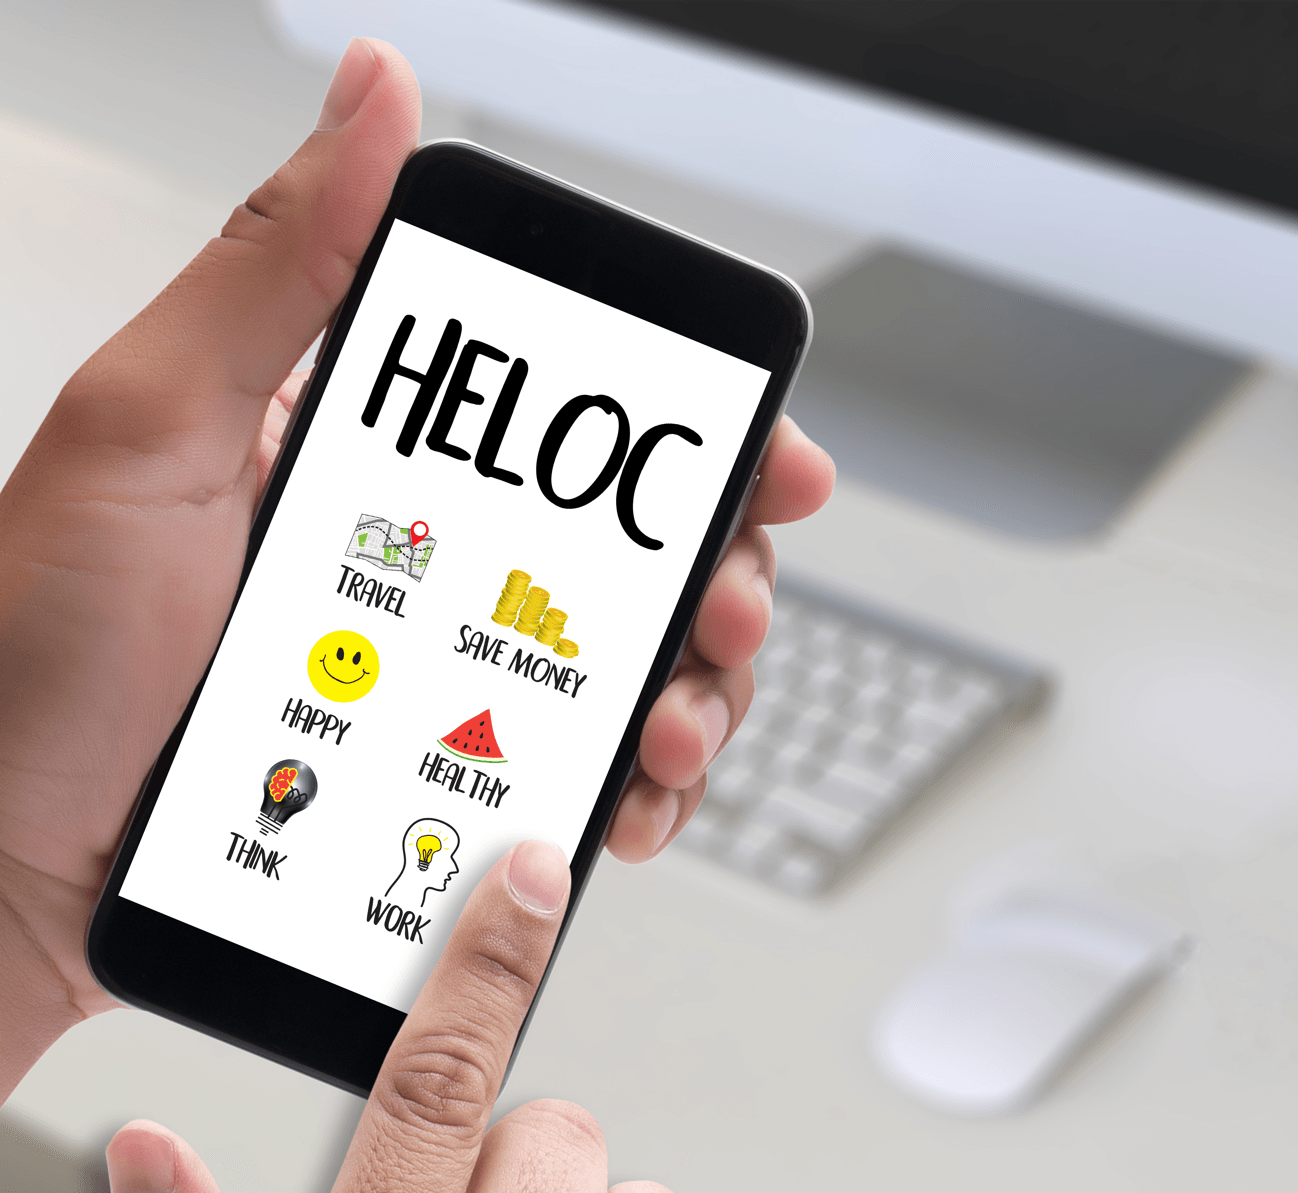 Is a HELOC Right for Me? App Image